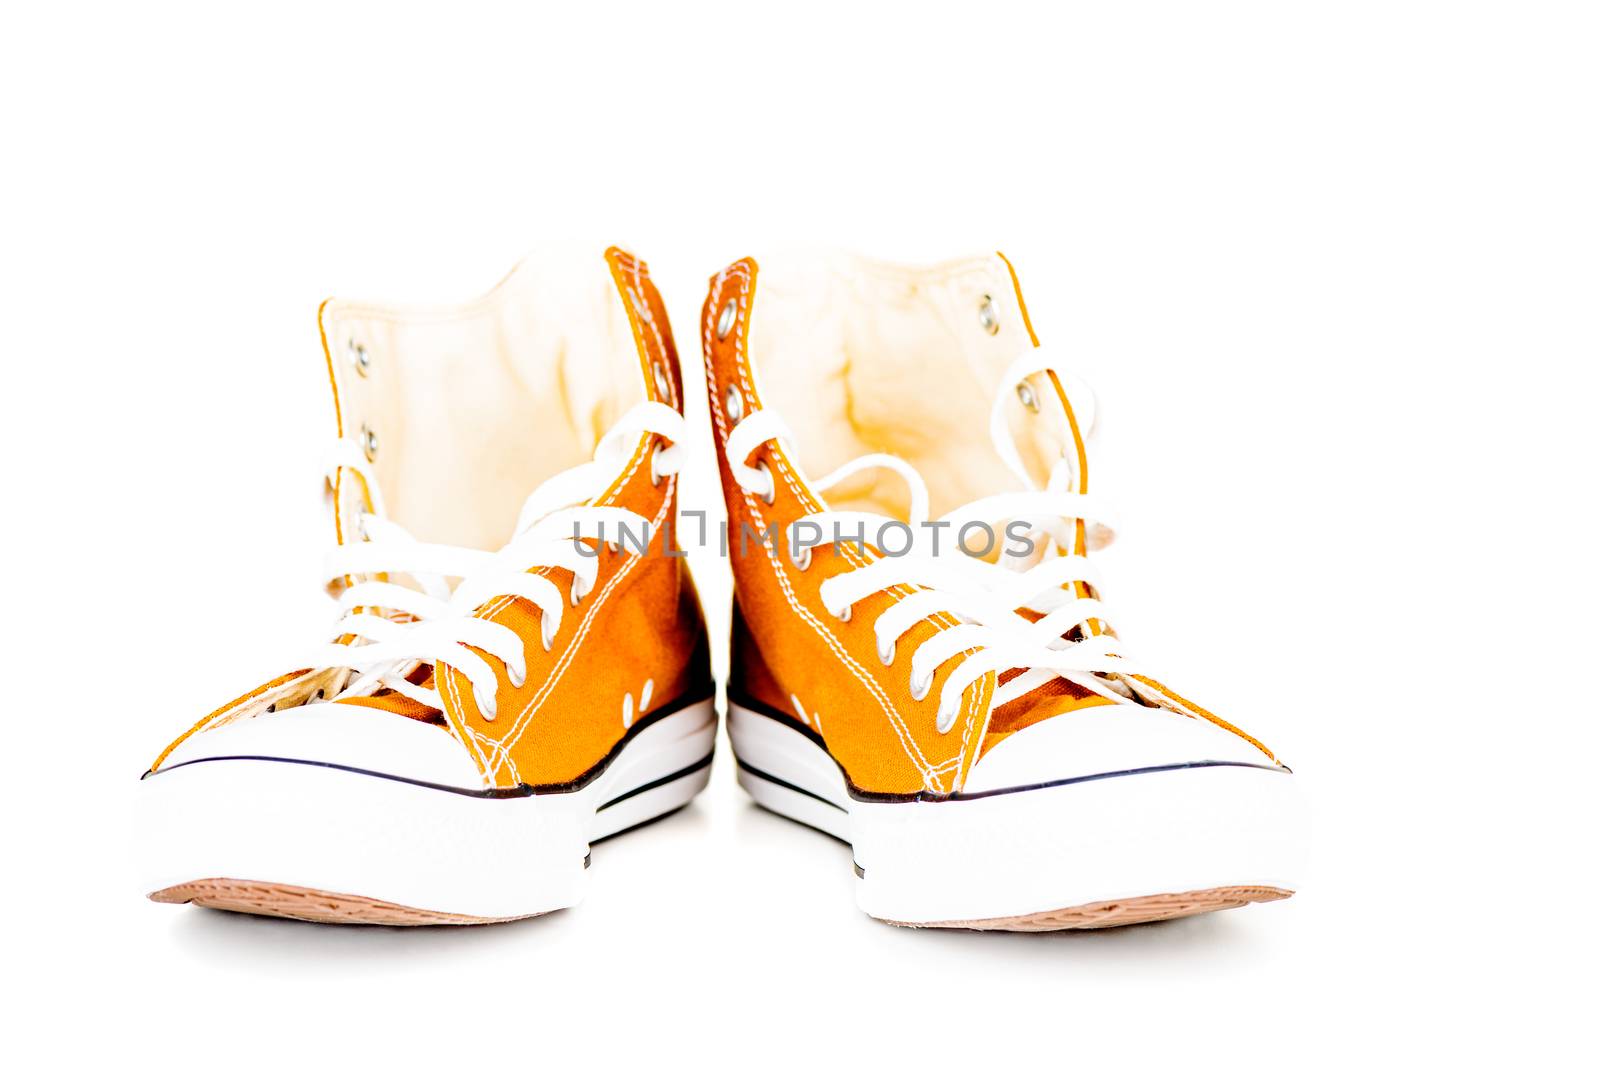 Pair of sneakers isolated on white background by Nanisimova